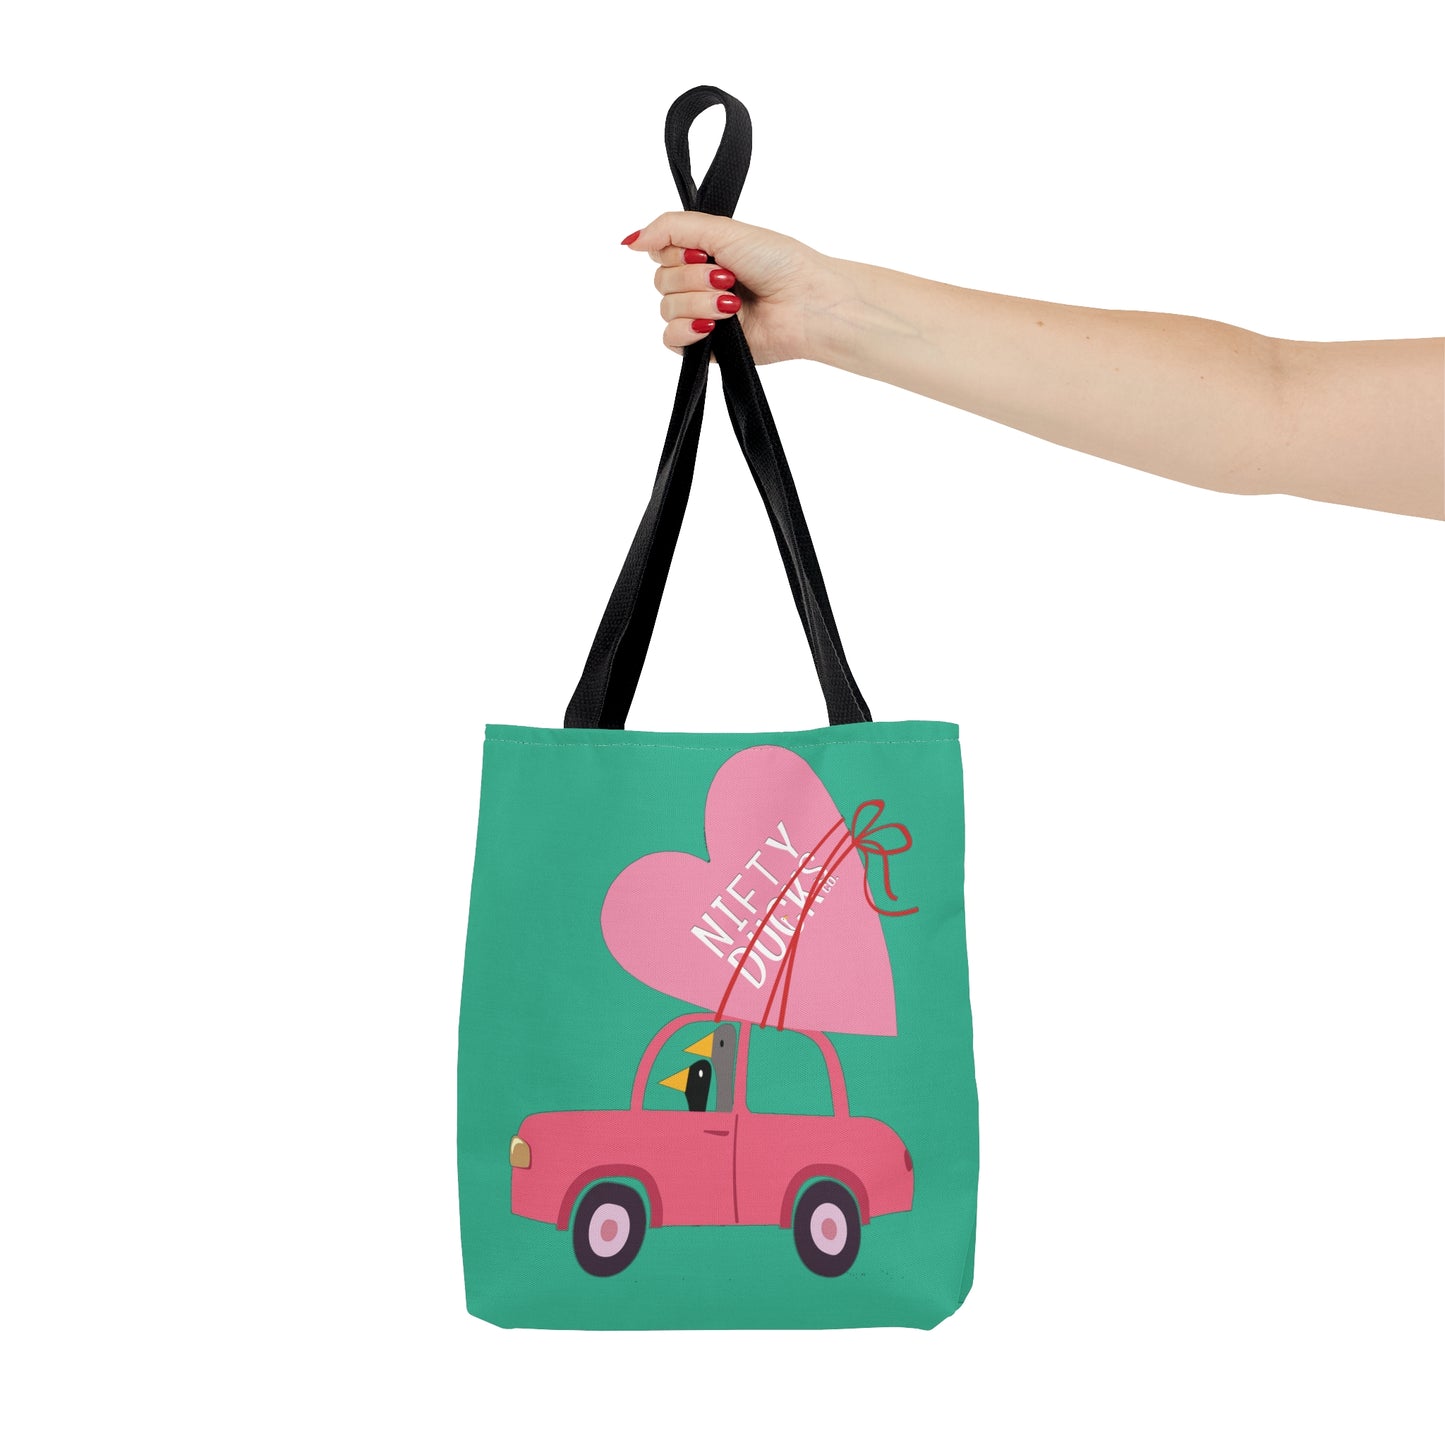 Ducks delivering a lot of love - Turquoise 12d3ad - Tote Bag